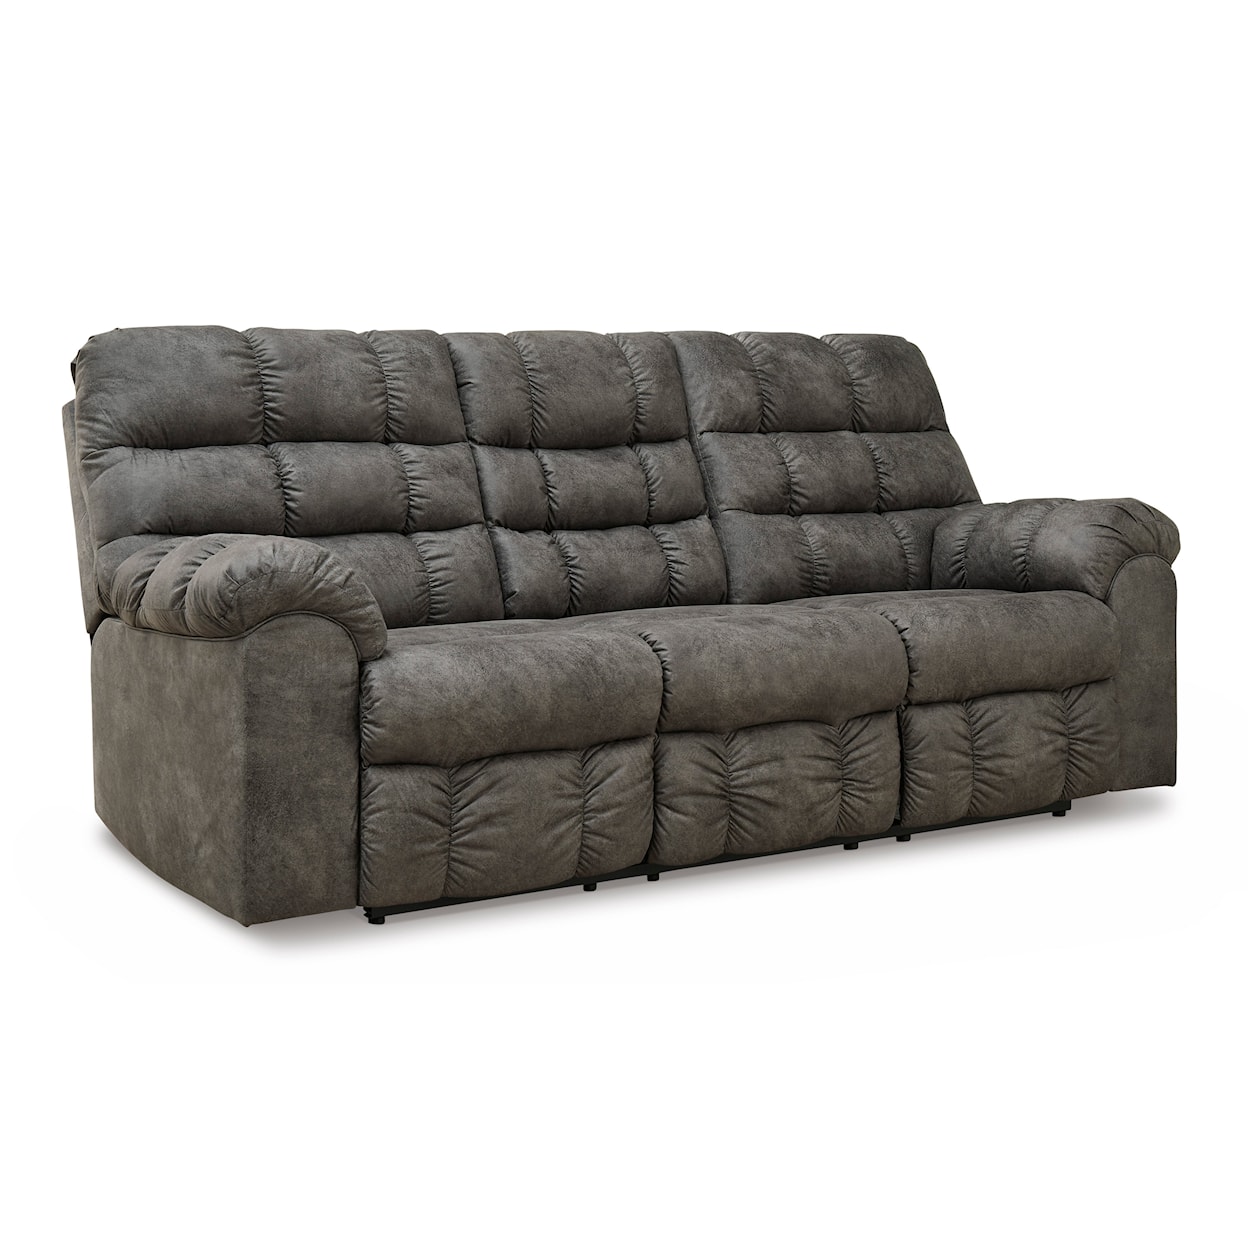 Benchcraft Derwin Reclining Sofa with Drop Down Table